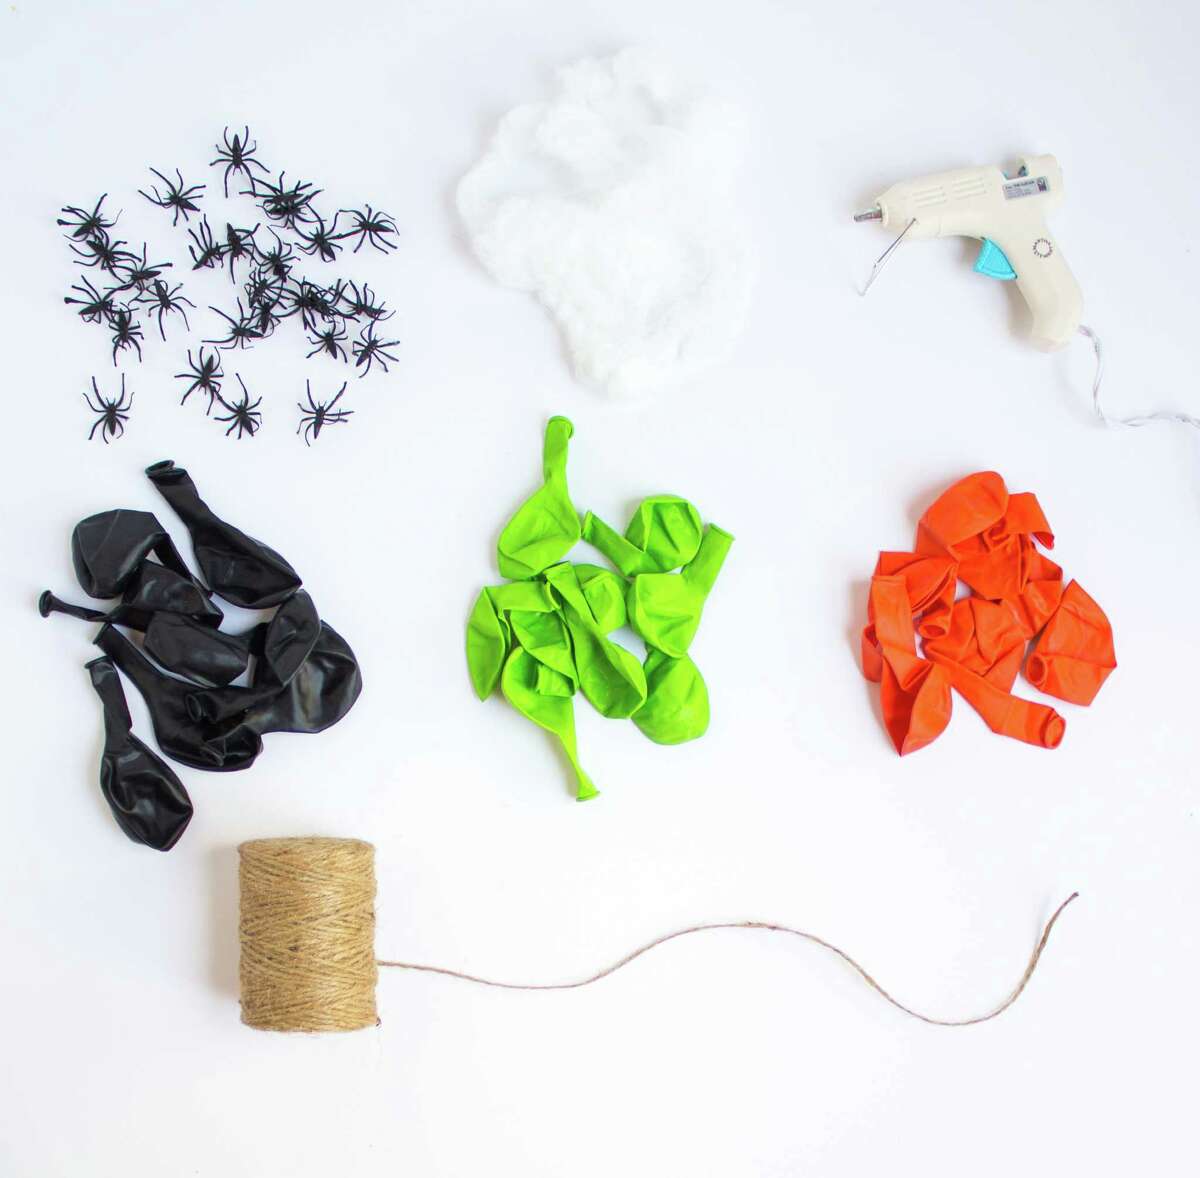 Materials 9- or 12-inch latex balloons in orange, black, and lime green (1 package of each is enough) Jute twine or string Small plastic spiders (you can buy these in a pack of 144 from OrientalTrading.com) Faux spiderweb Hot glue gun